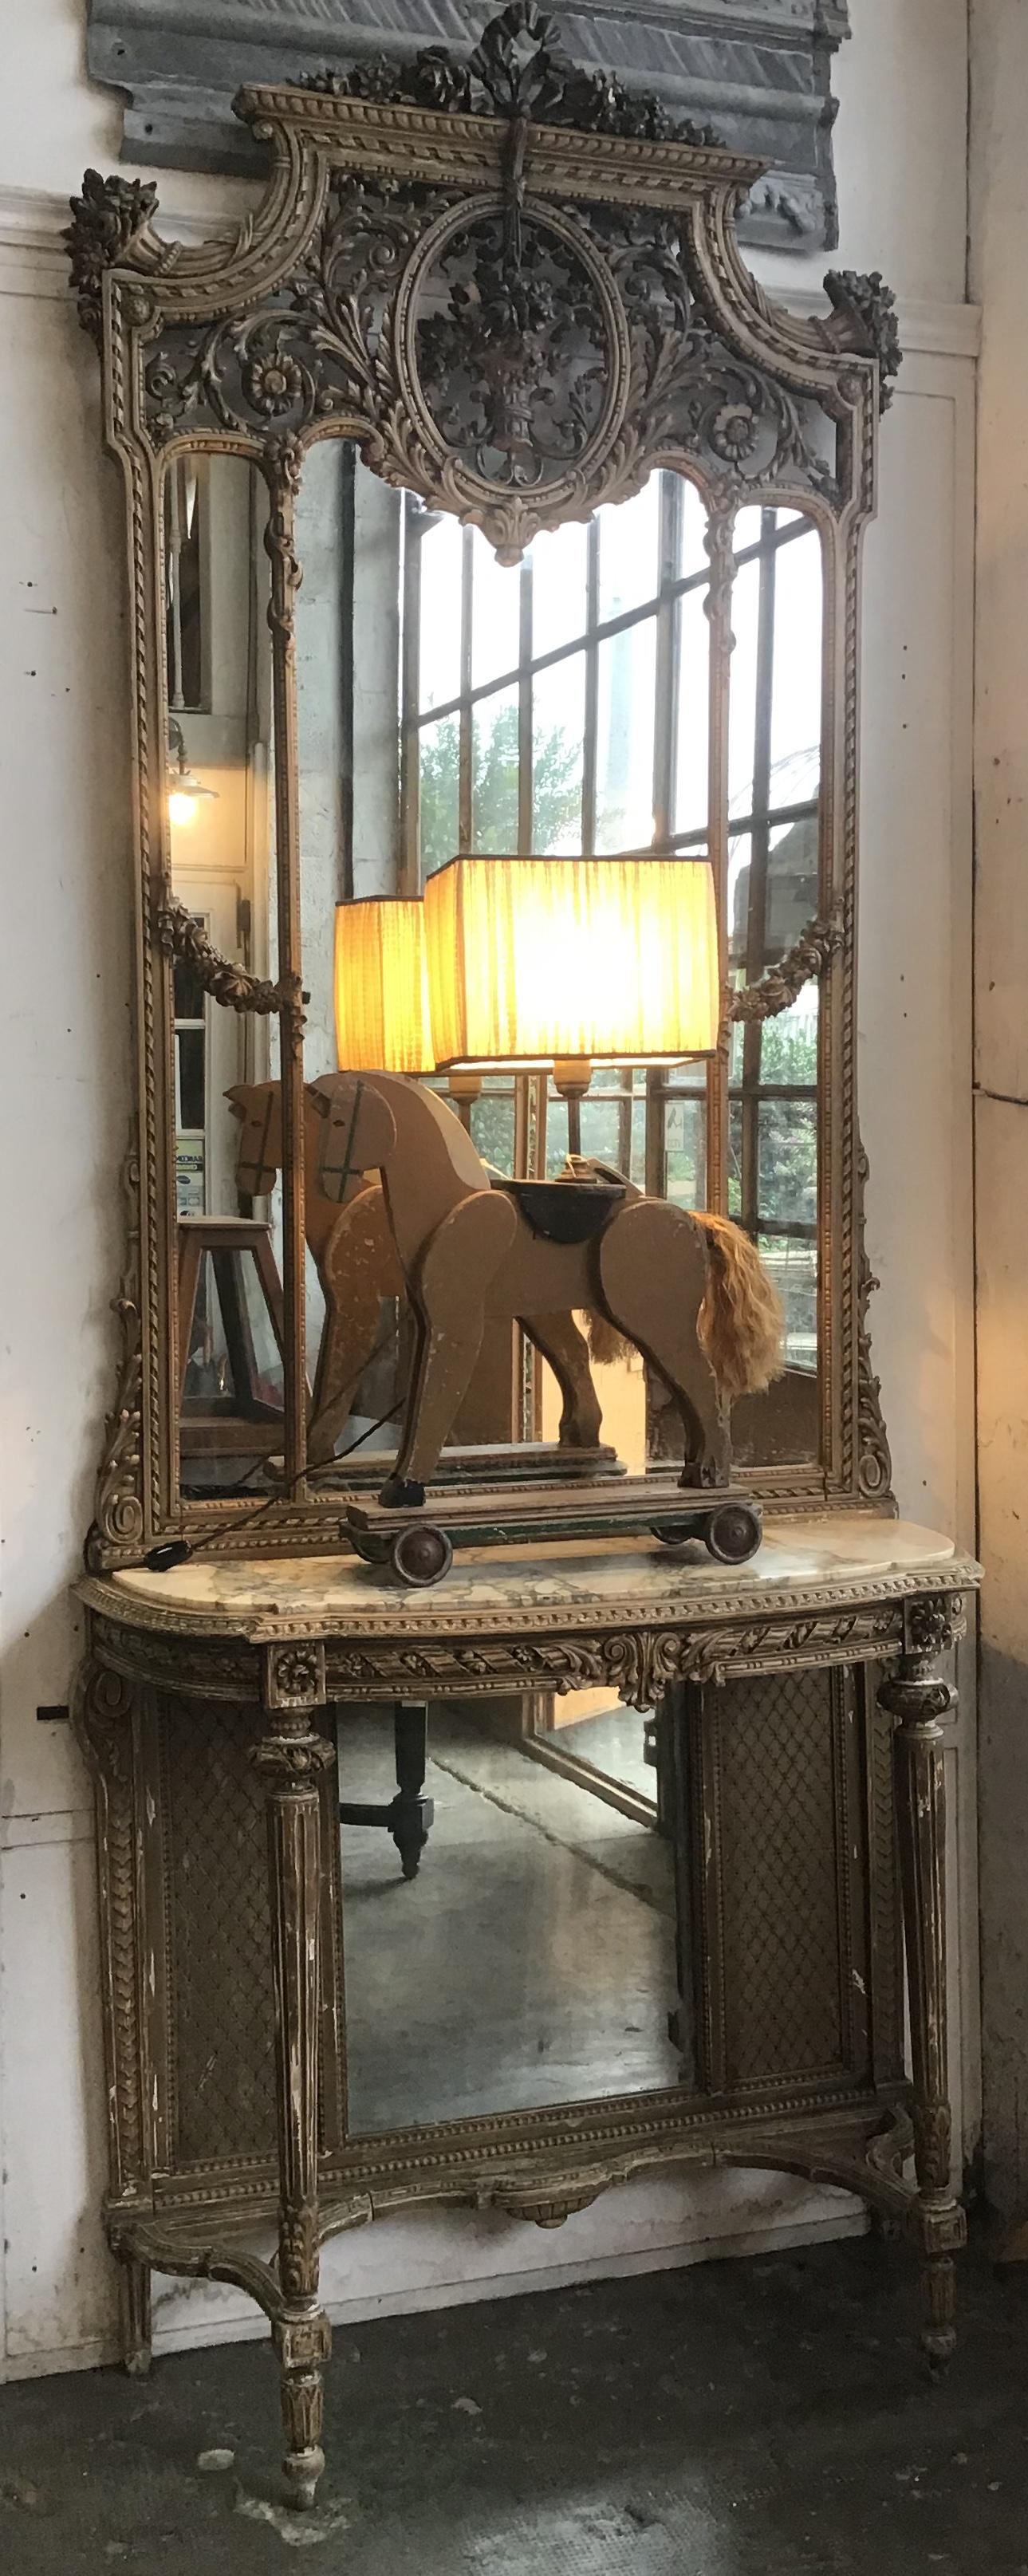 19th Century French Marble-Top Console with Giltwood Framed Mirror from 1890s (Barock)